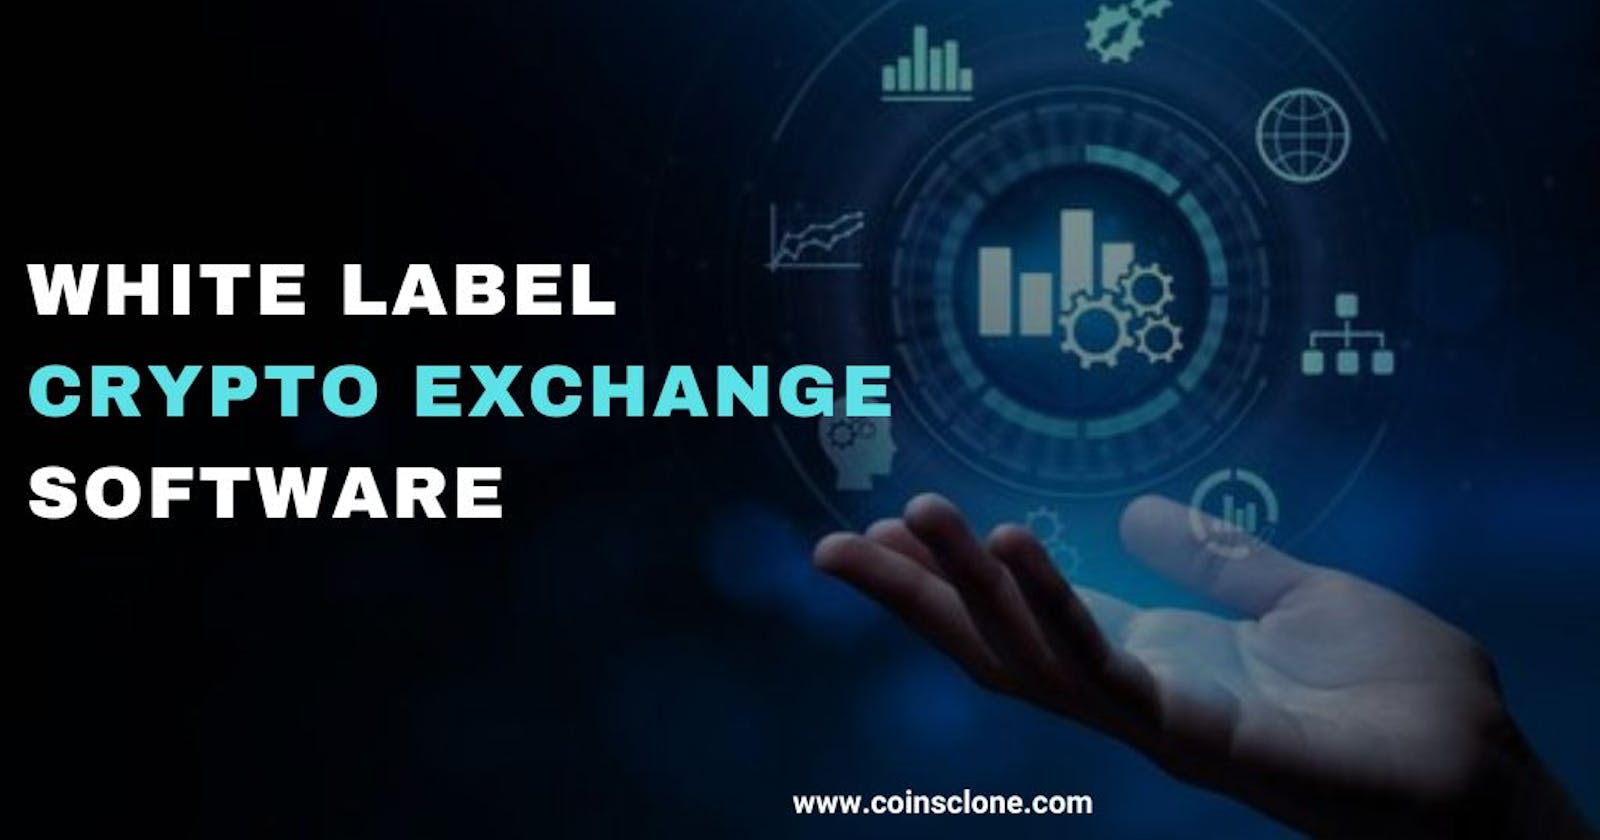 Why is white label cryptocurrency exchange software a better choice ??